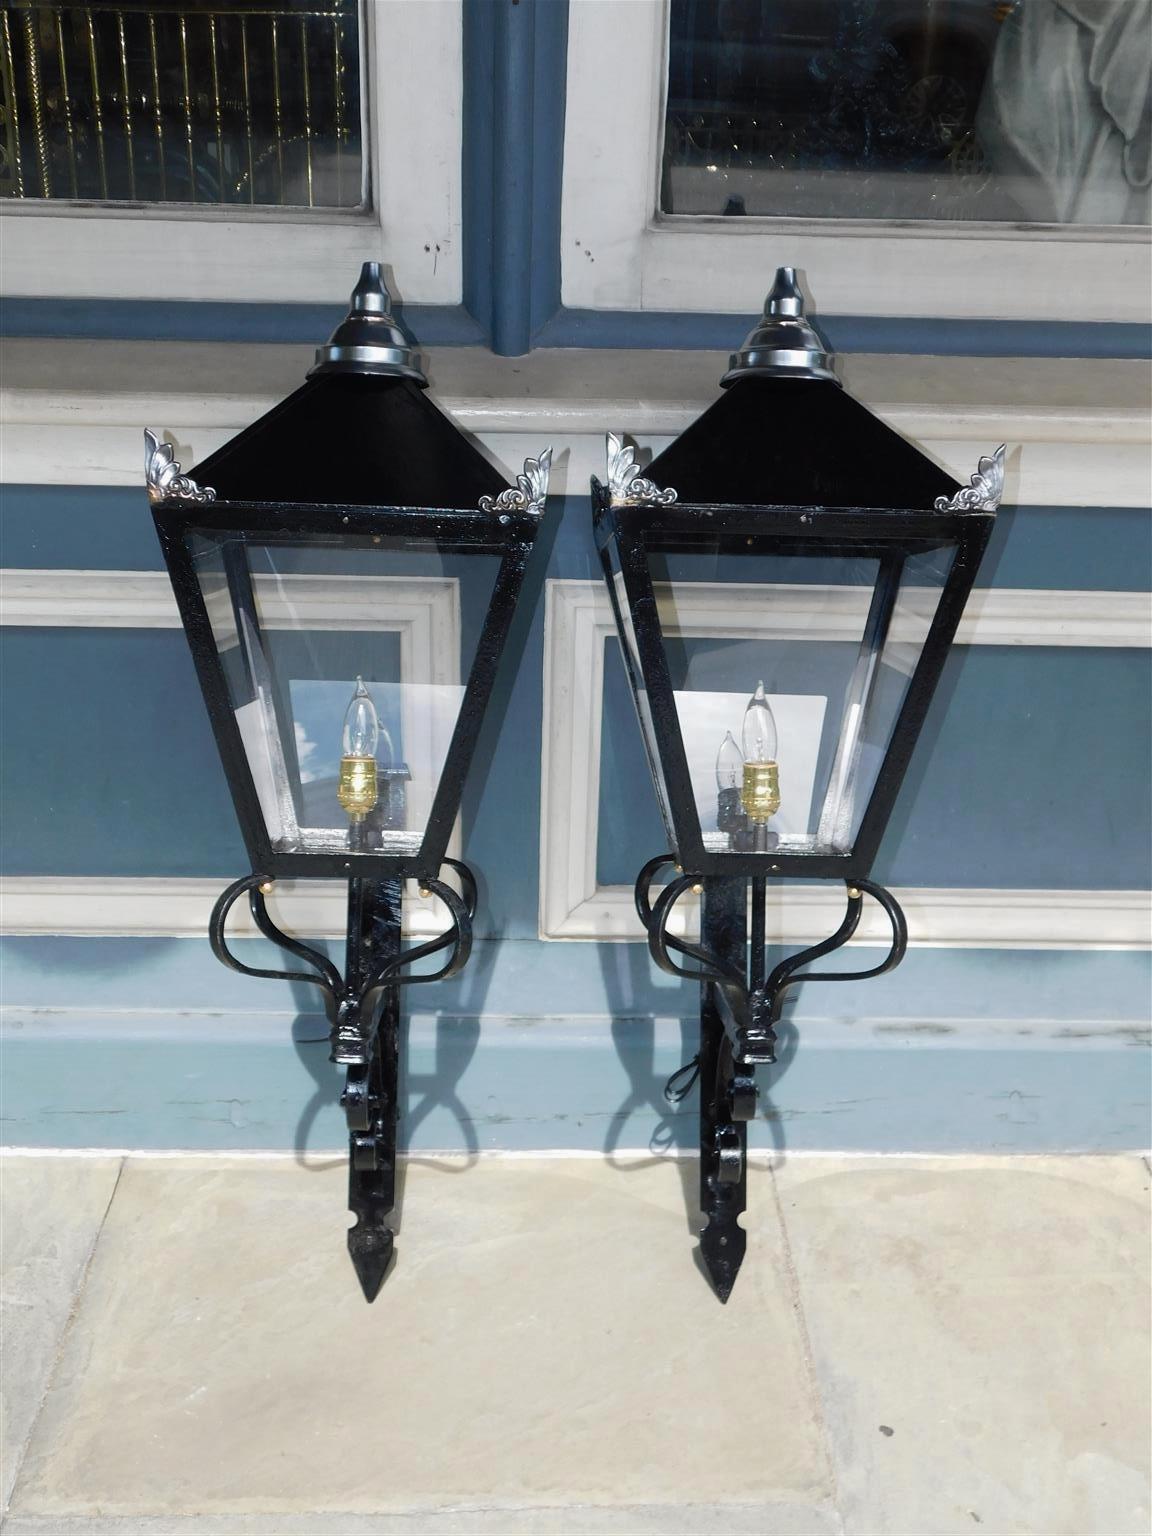 Pair of American wrought iron, paneled glass, and spelter finial decorative wall lanterns mounted on the original scrolled iron brackets. Originally gas and have been electrified with single interior socket. Mid 19th century.